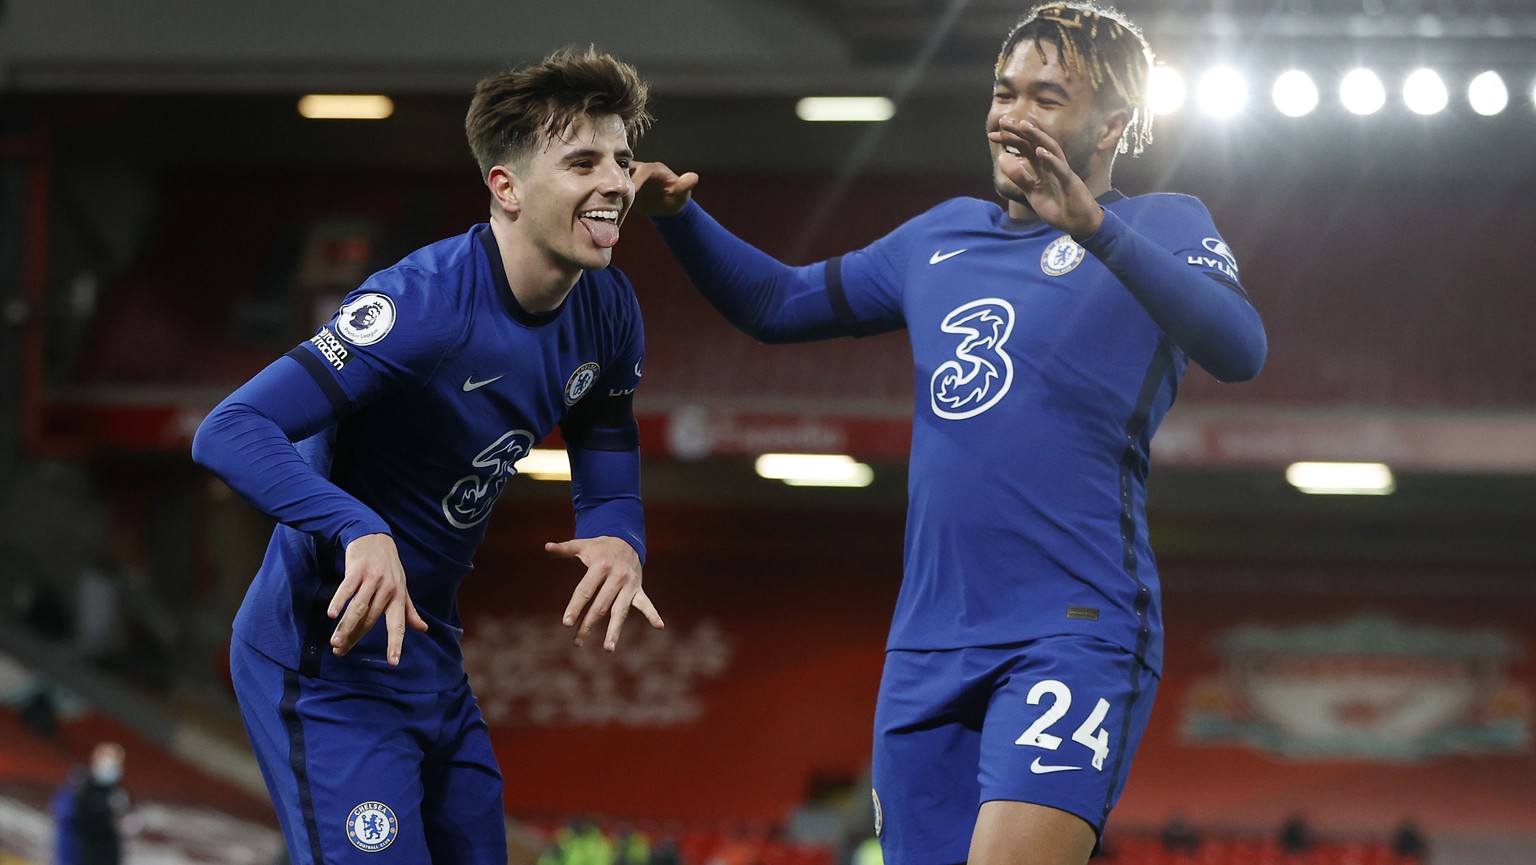 Chelsea&#039;s Mason Mount, left, celebrates with his teammate Reece James after scoring his side&#039;s opening goal during the English Premier League soccer match between Liverpool and Chelsea at An ...